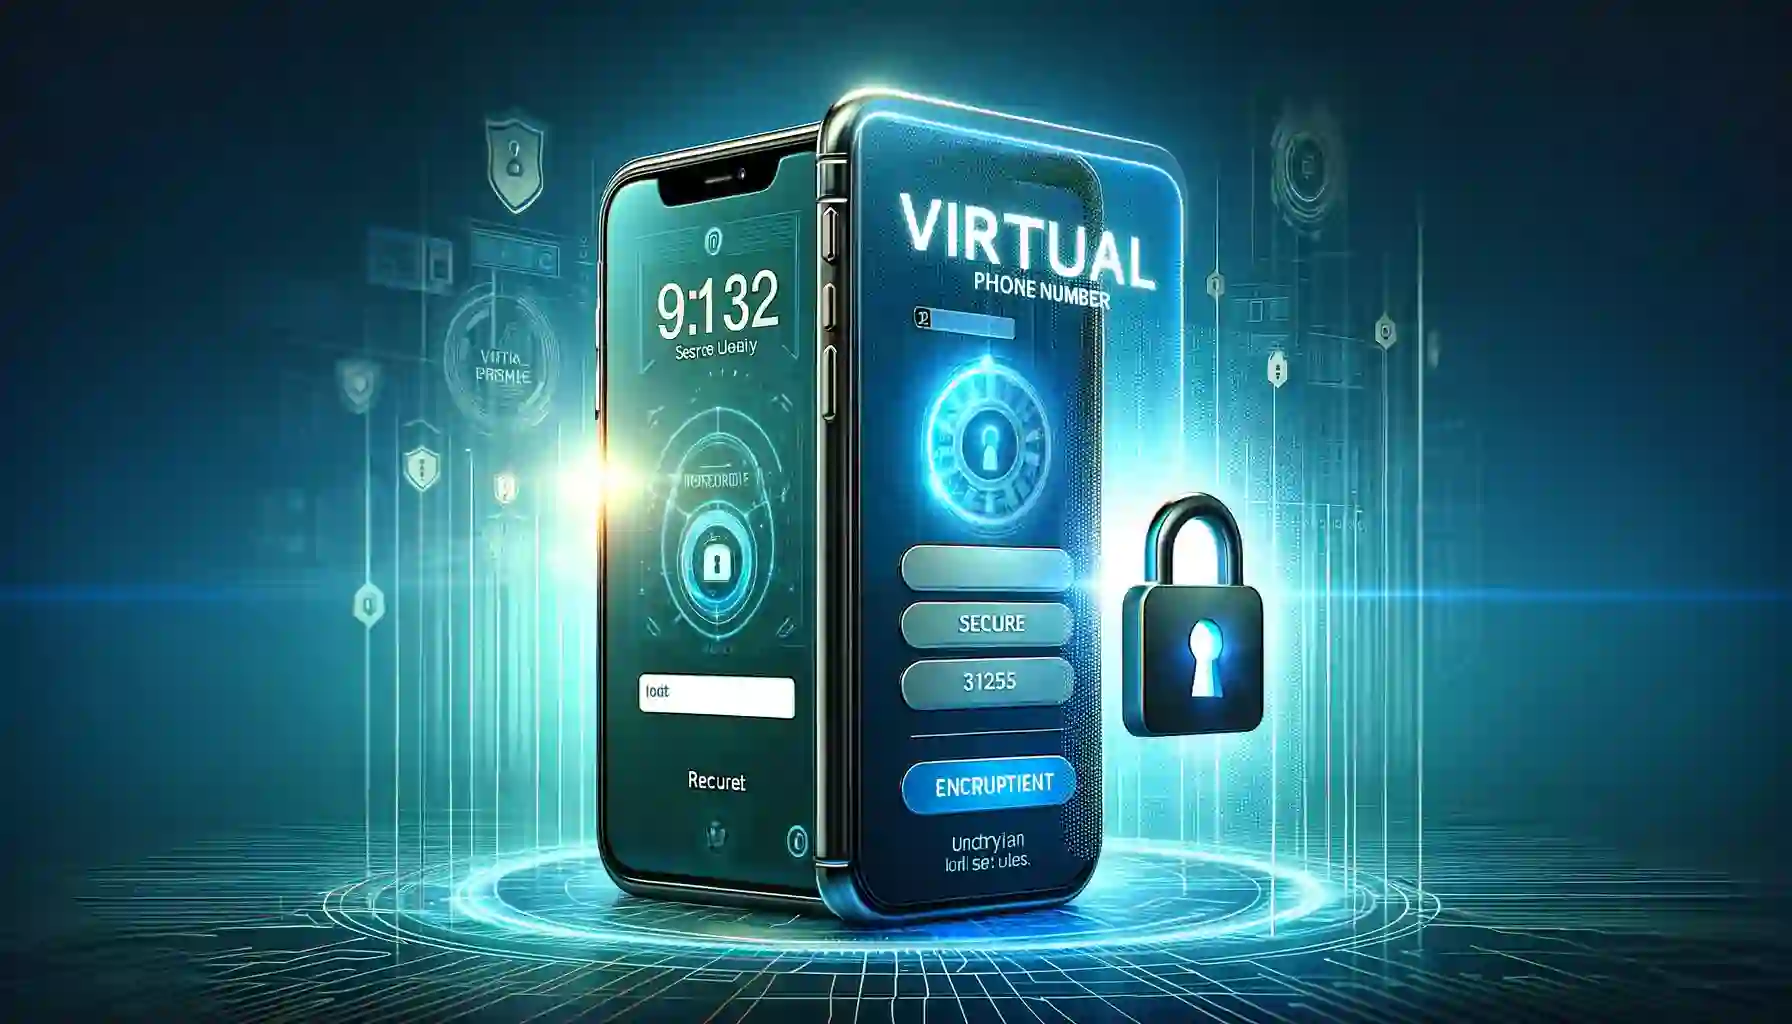 virtual phone number for iPhone security